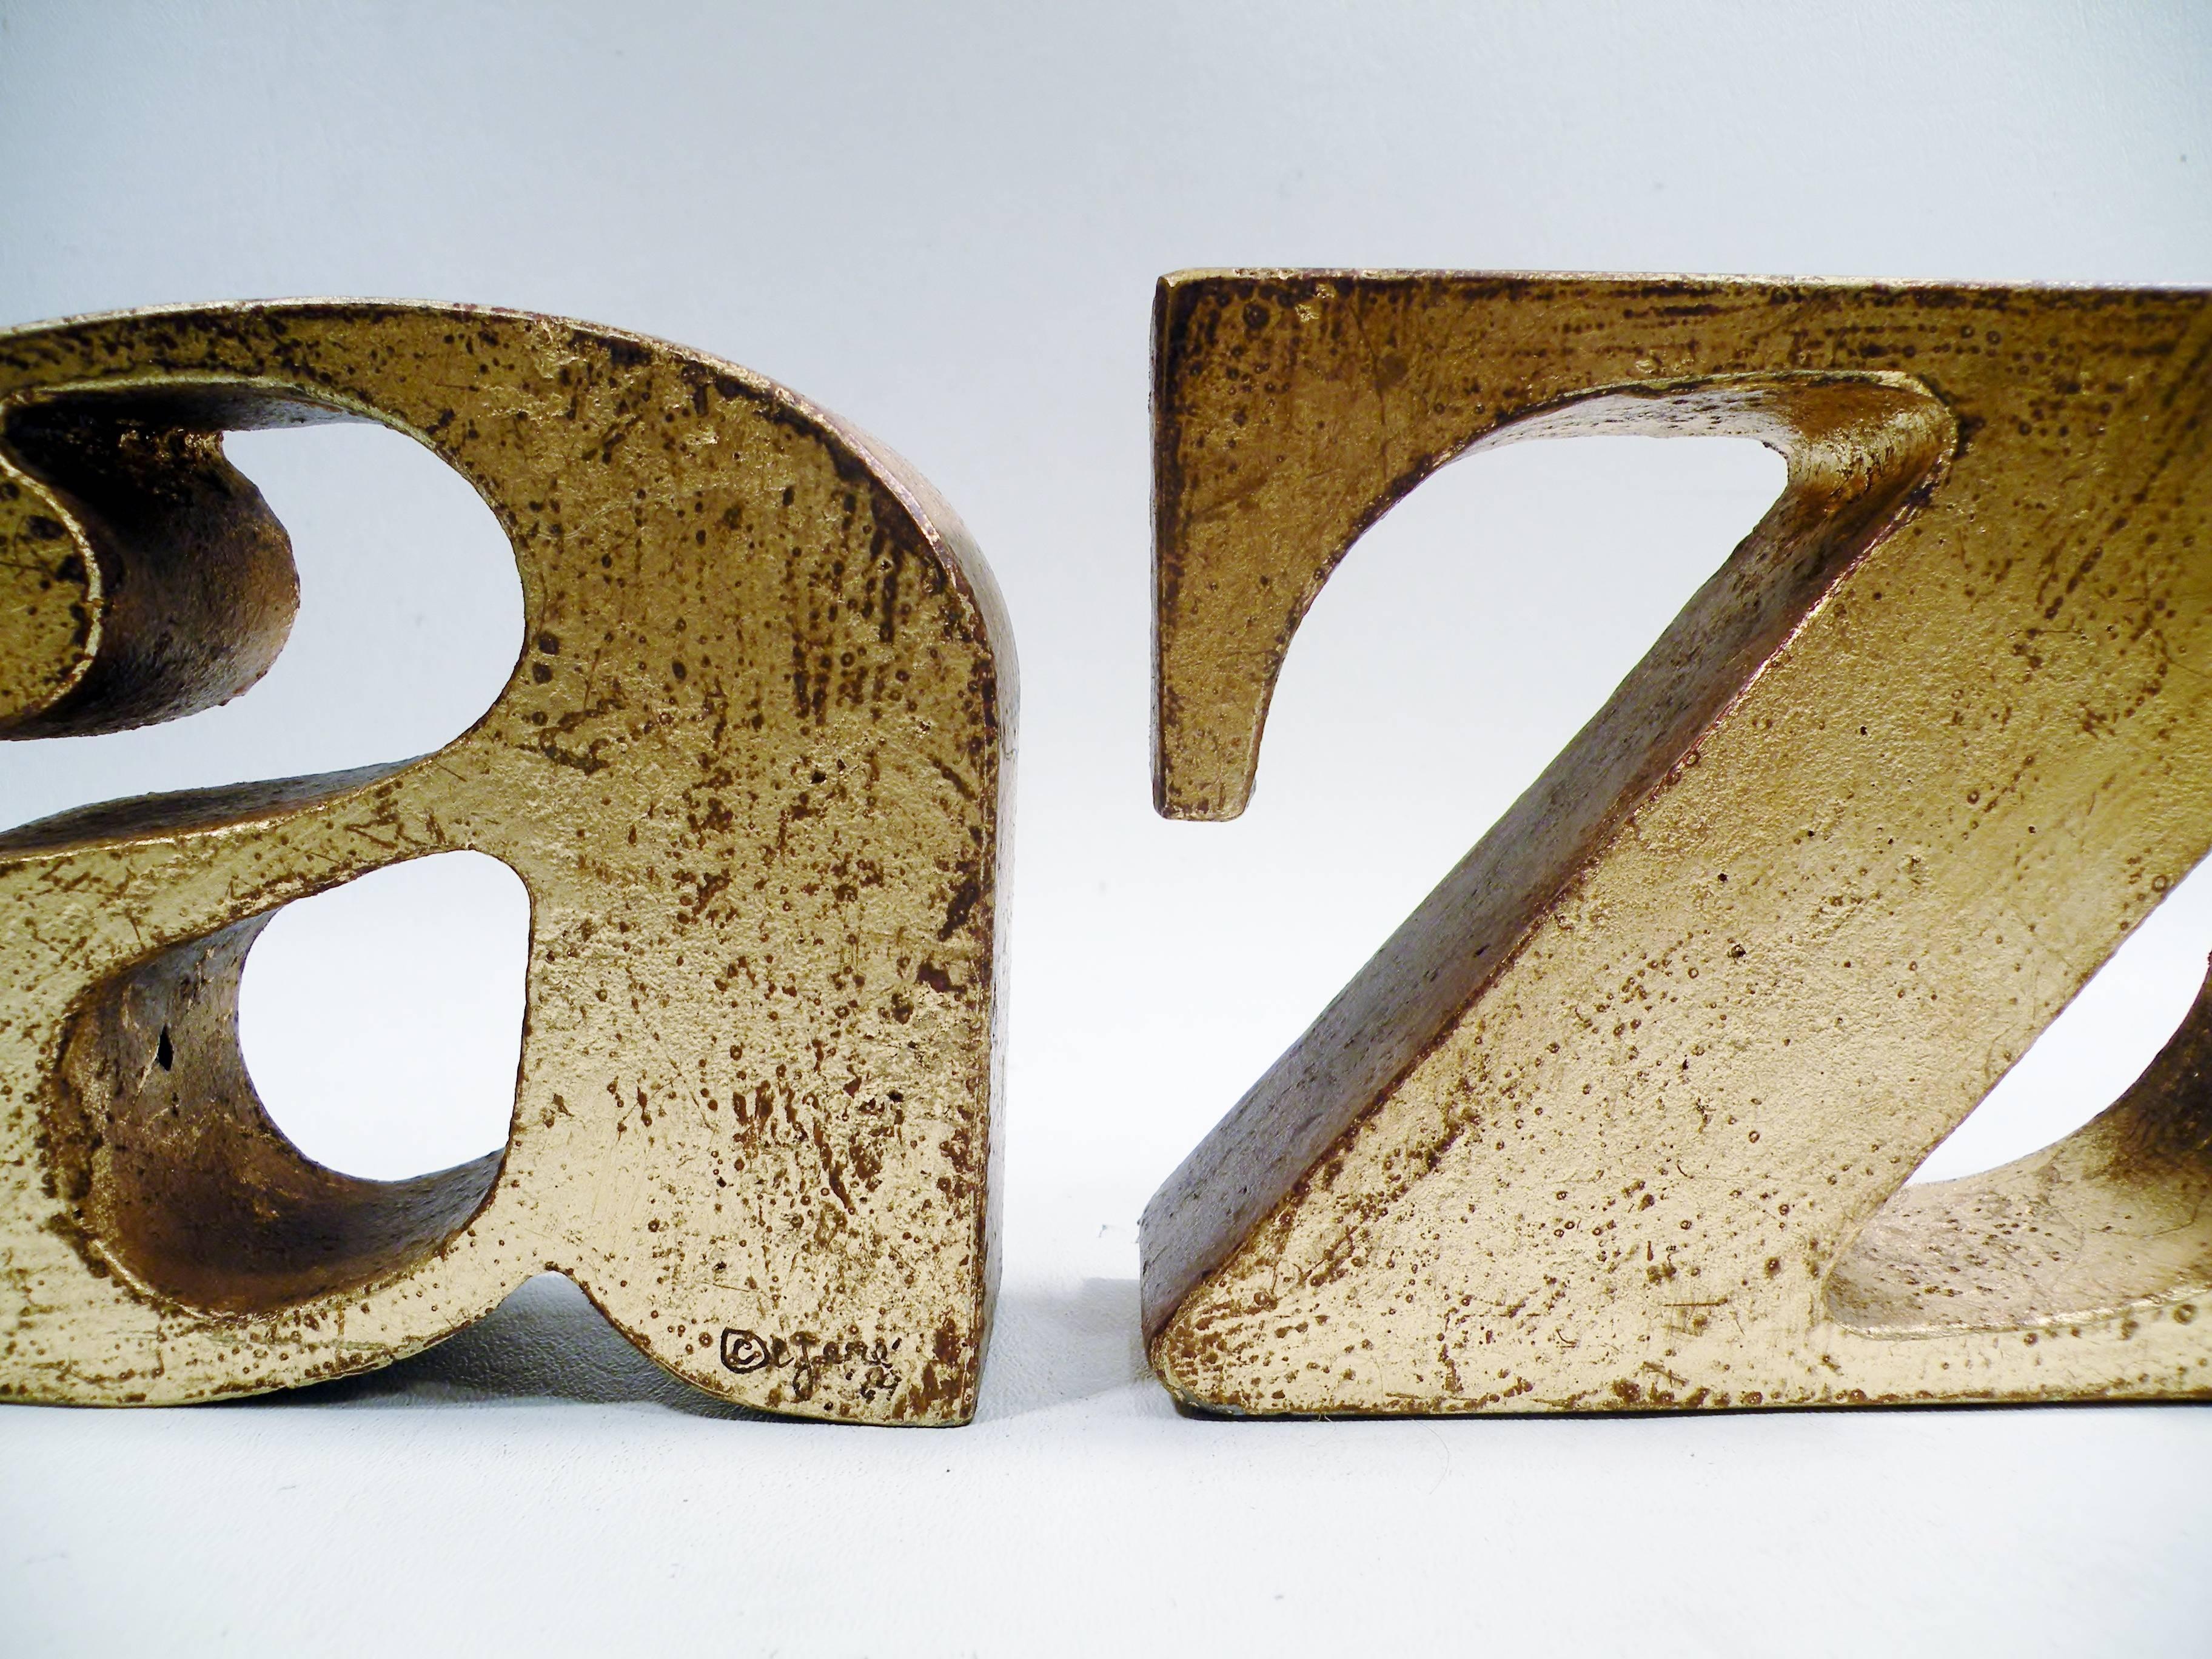 Pair of heavy gilded cast iron A to Z bookends from the renowned studios of Curtis Jere. Each signed C. Jere and dated ’69 measuring 4.5